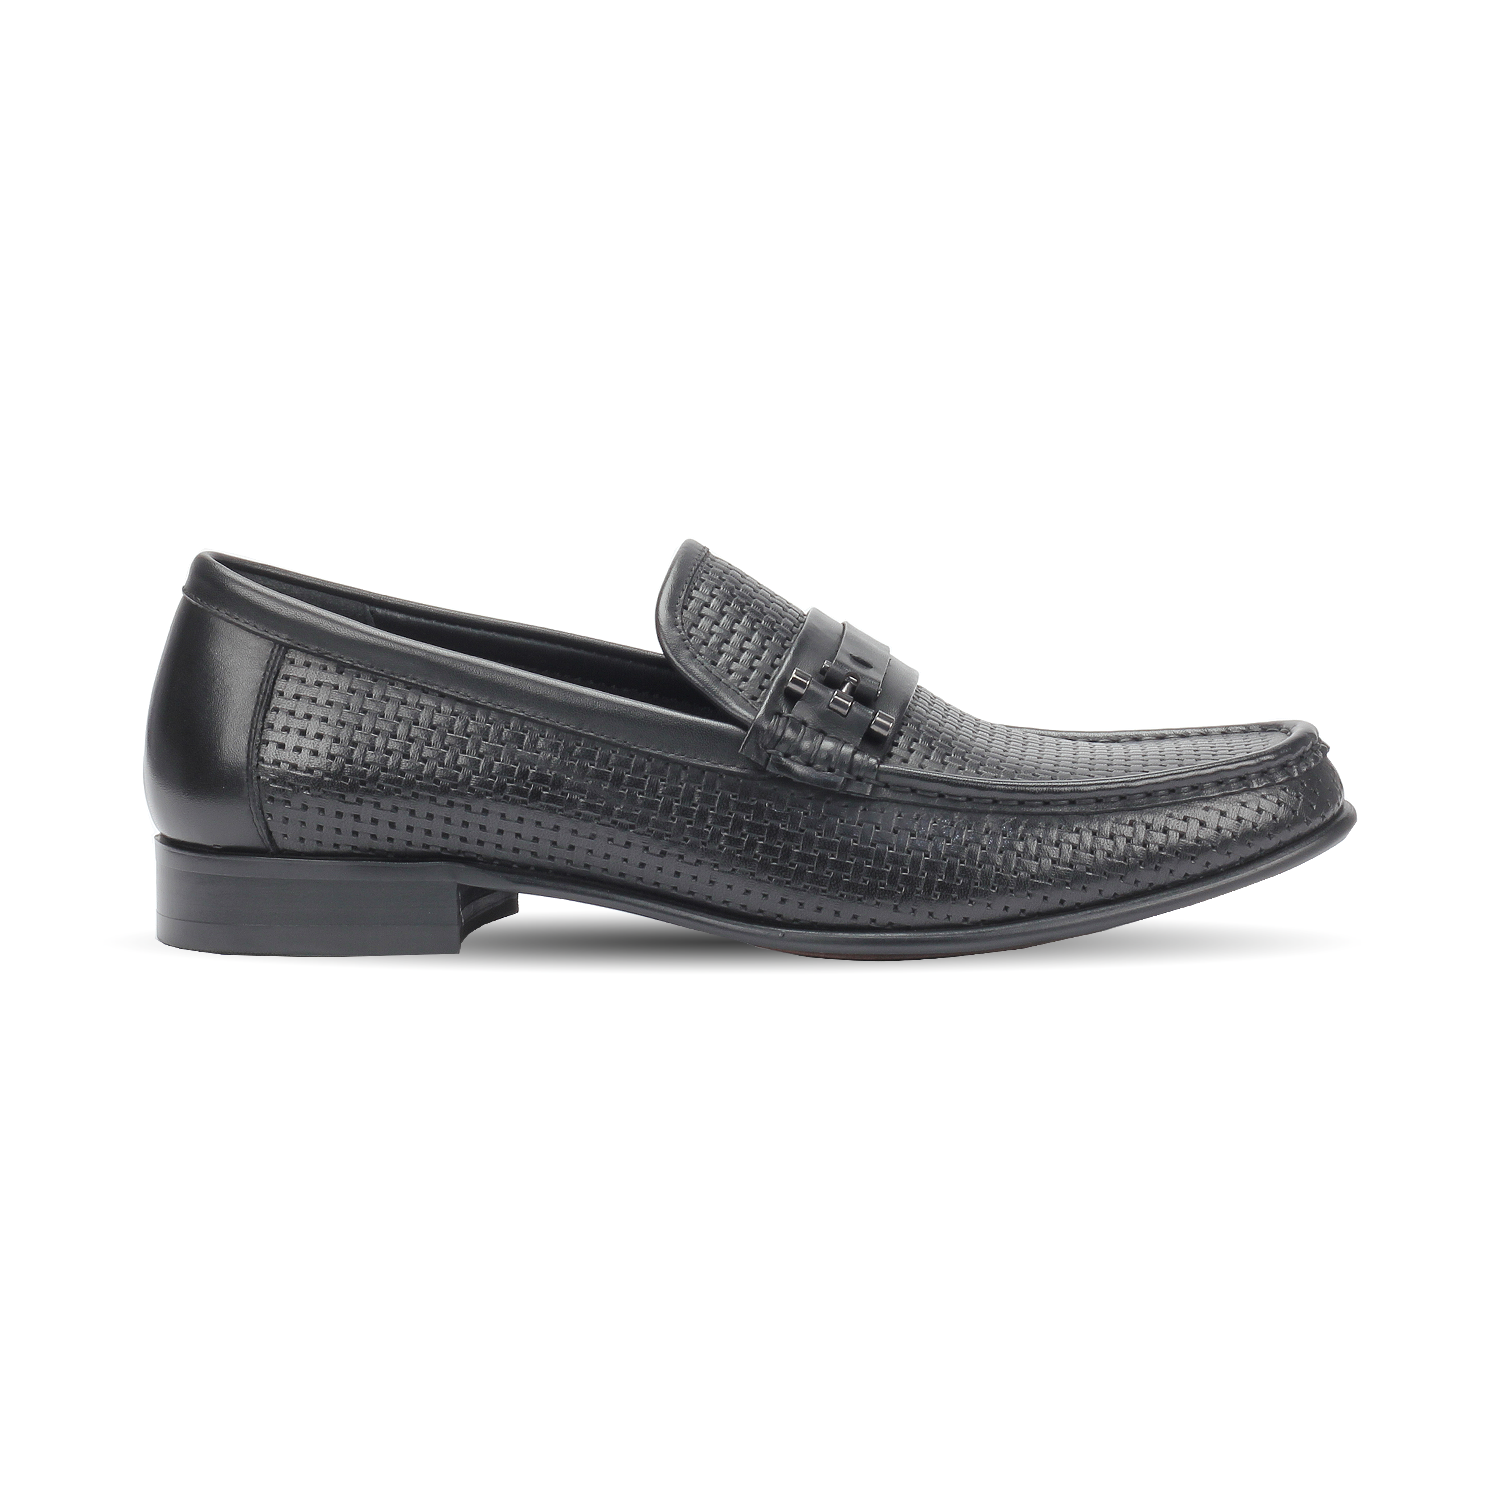 Pavers England's Best Formal Loafers for Men for Different Occasions